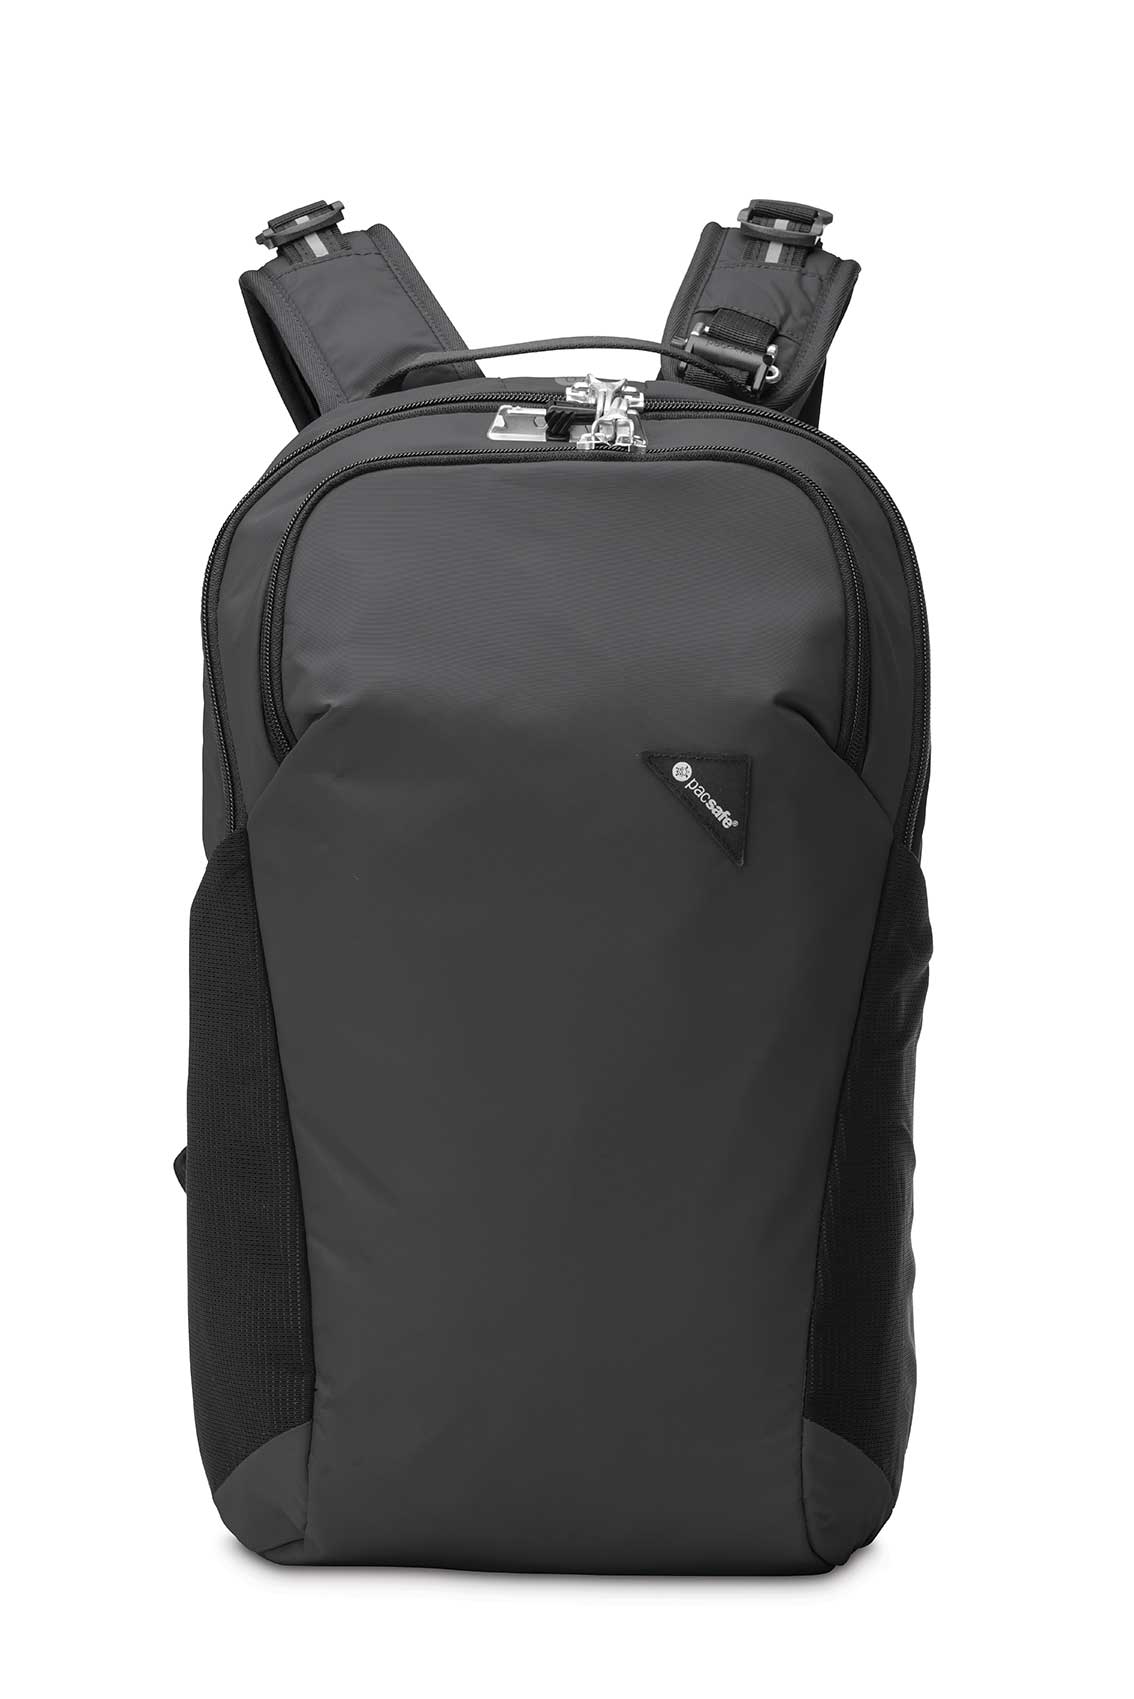 Pacsafe Vibe 25 anti-theft backpack